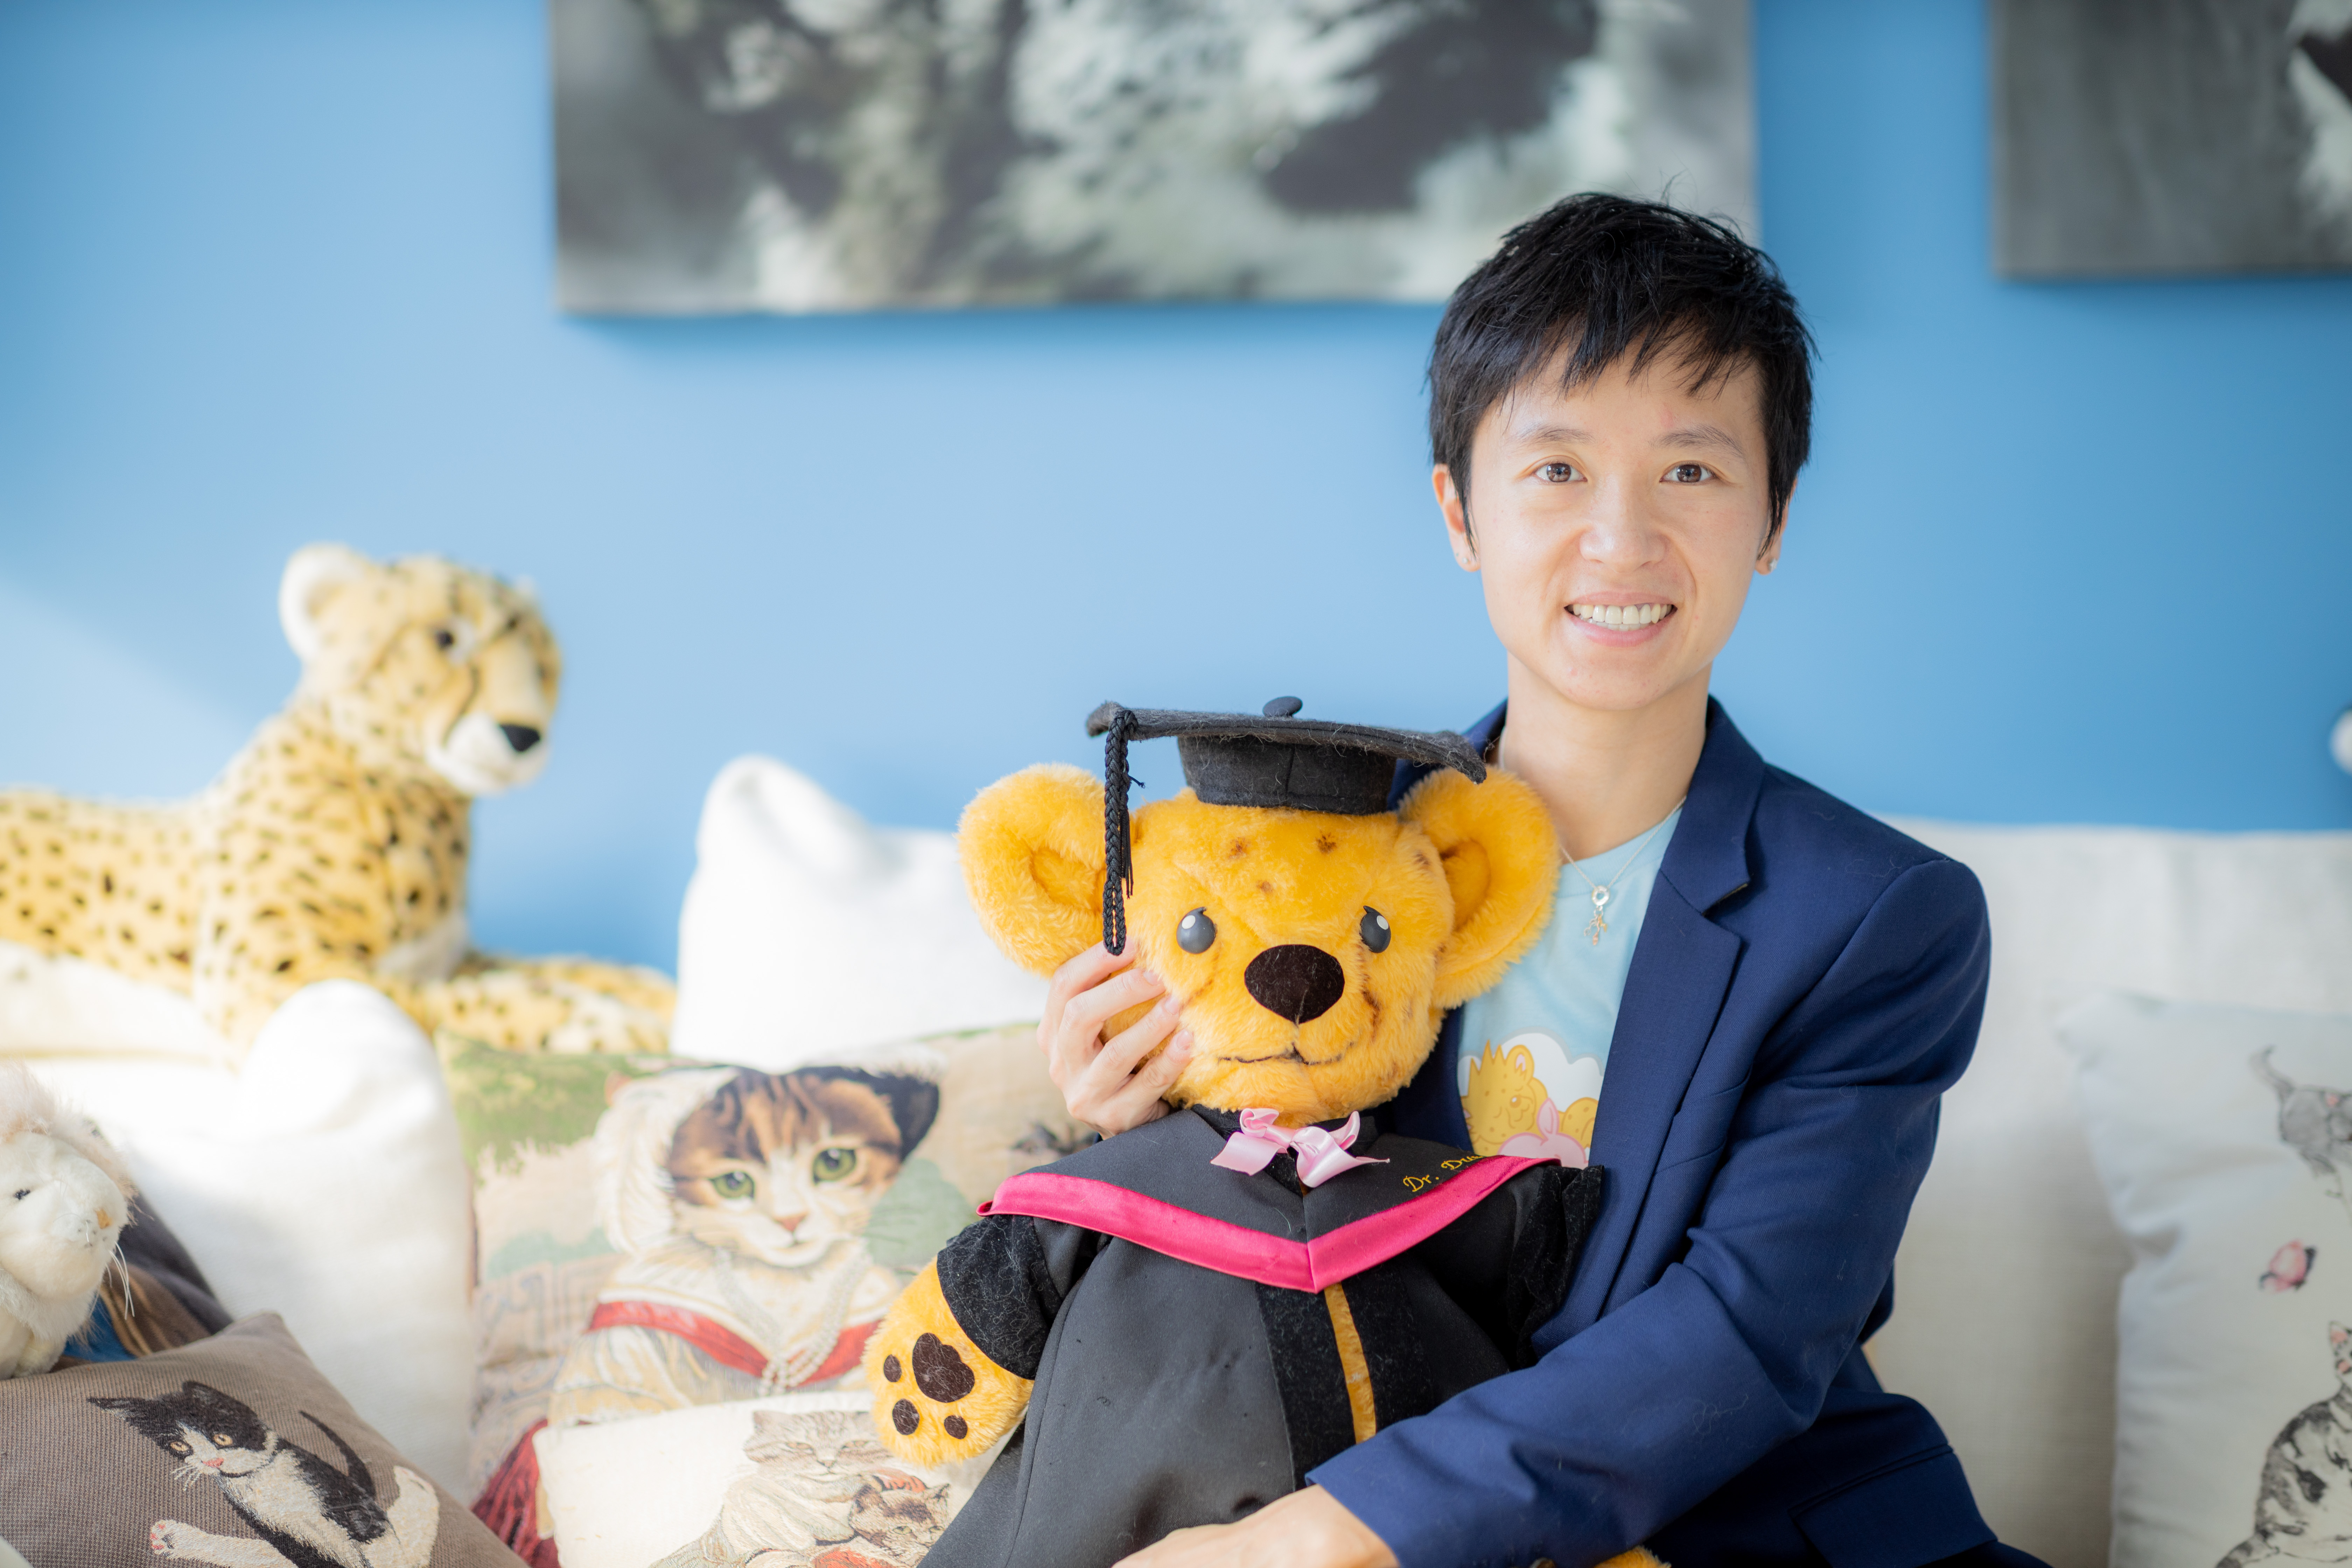 Dr. LIYEUNG Lucci Lugee (MBChB 2011) is the awardee in Cultural Accomplishment 2020 of the CUHK Distinguished Medical Alumni Award